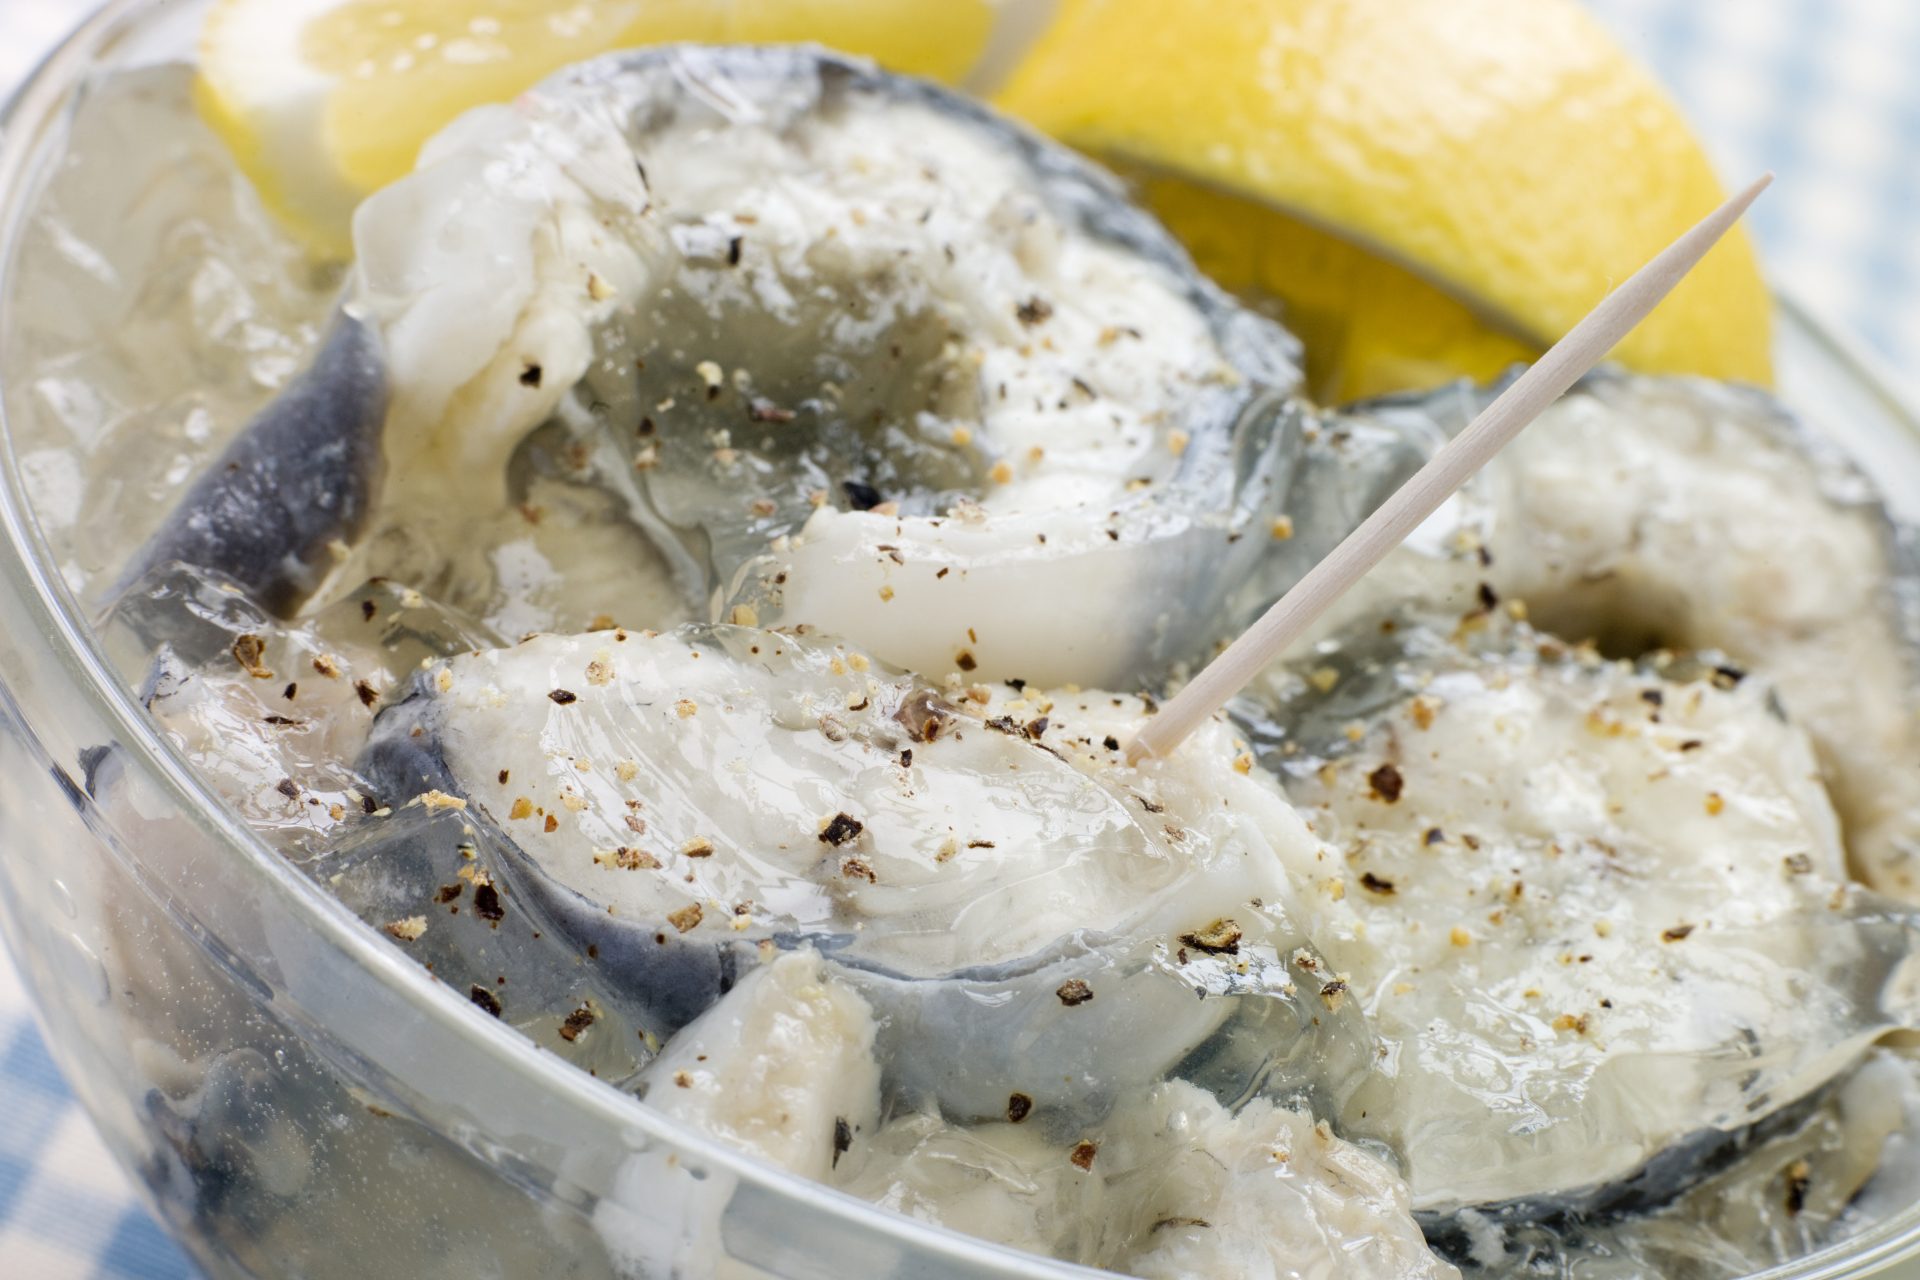 A photograph depicting chunks of gelatinized eels in a transparent bowl. A toothpick is sticking out from one of the chunks. There is a lemon slice in the bowl.